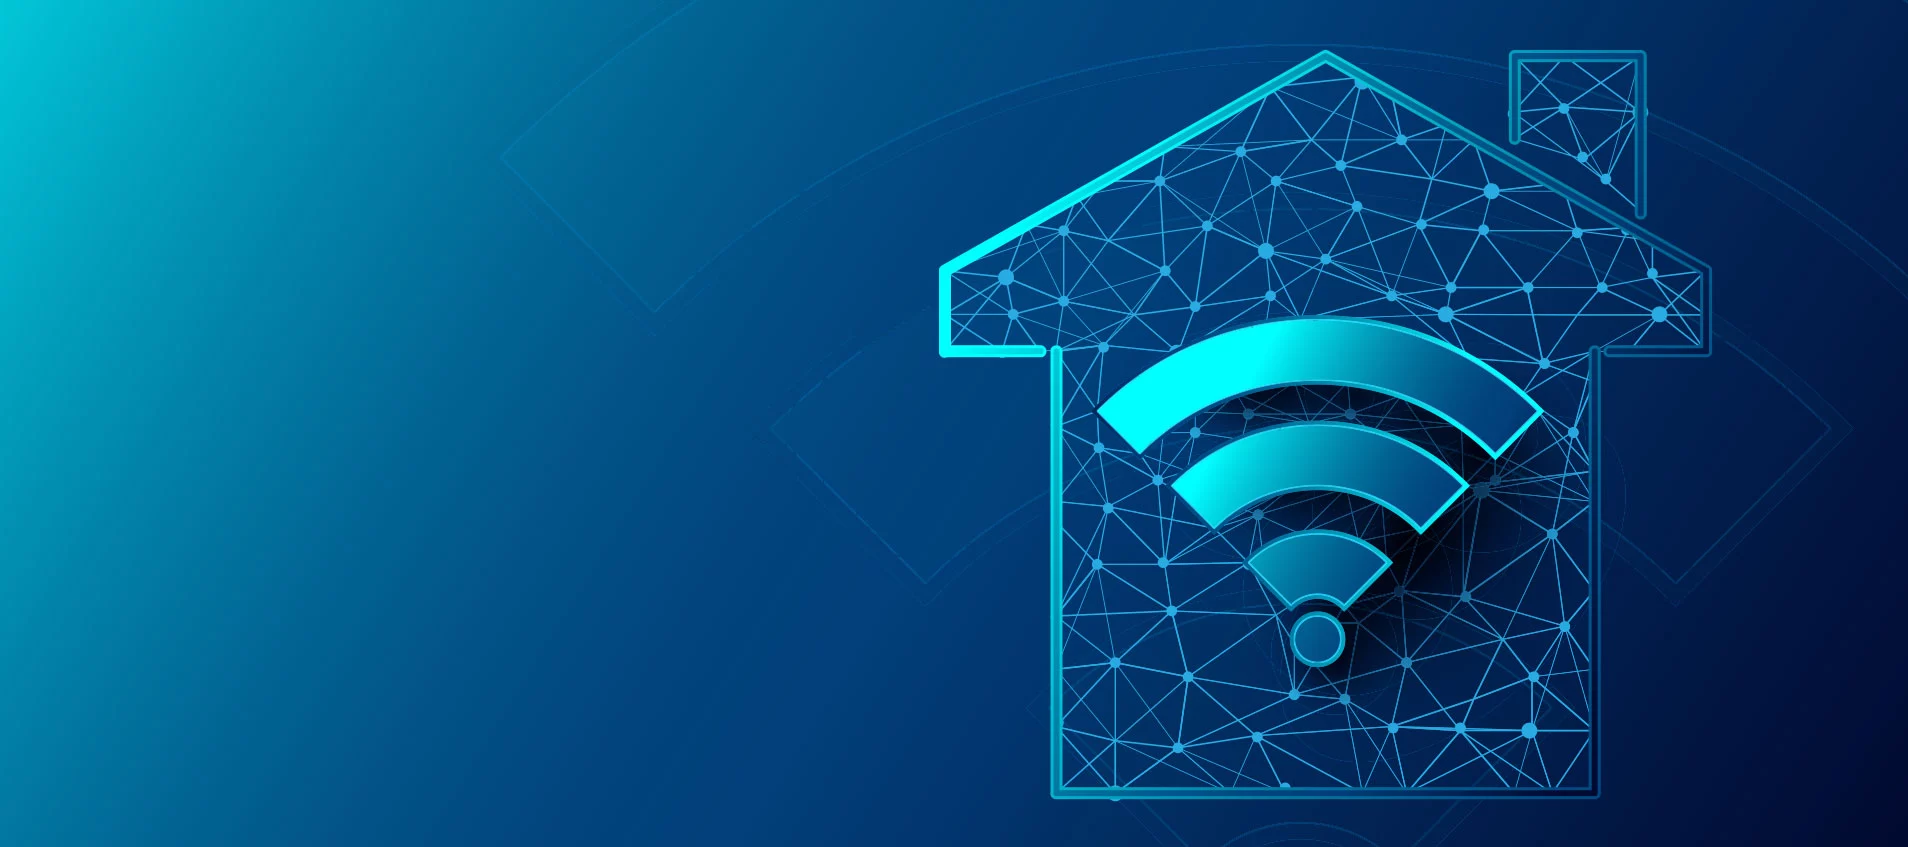 Can a Wi-Fi Extender Improve Your Internet?